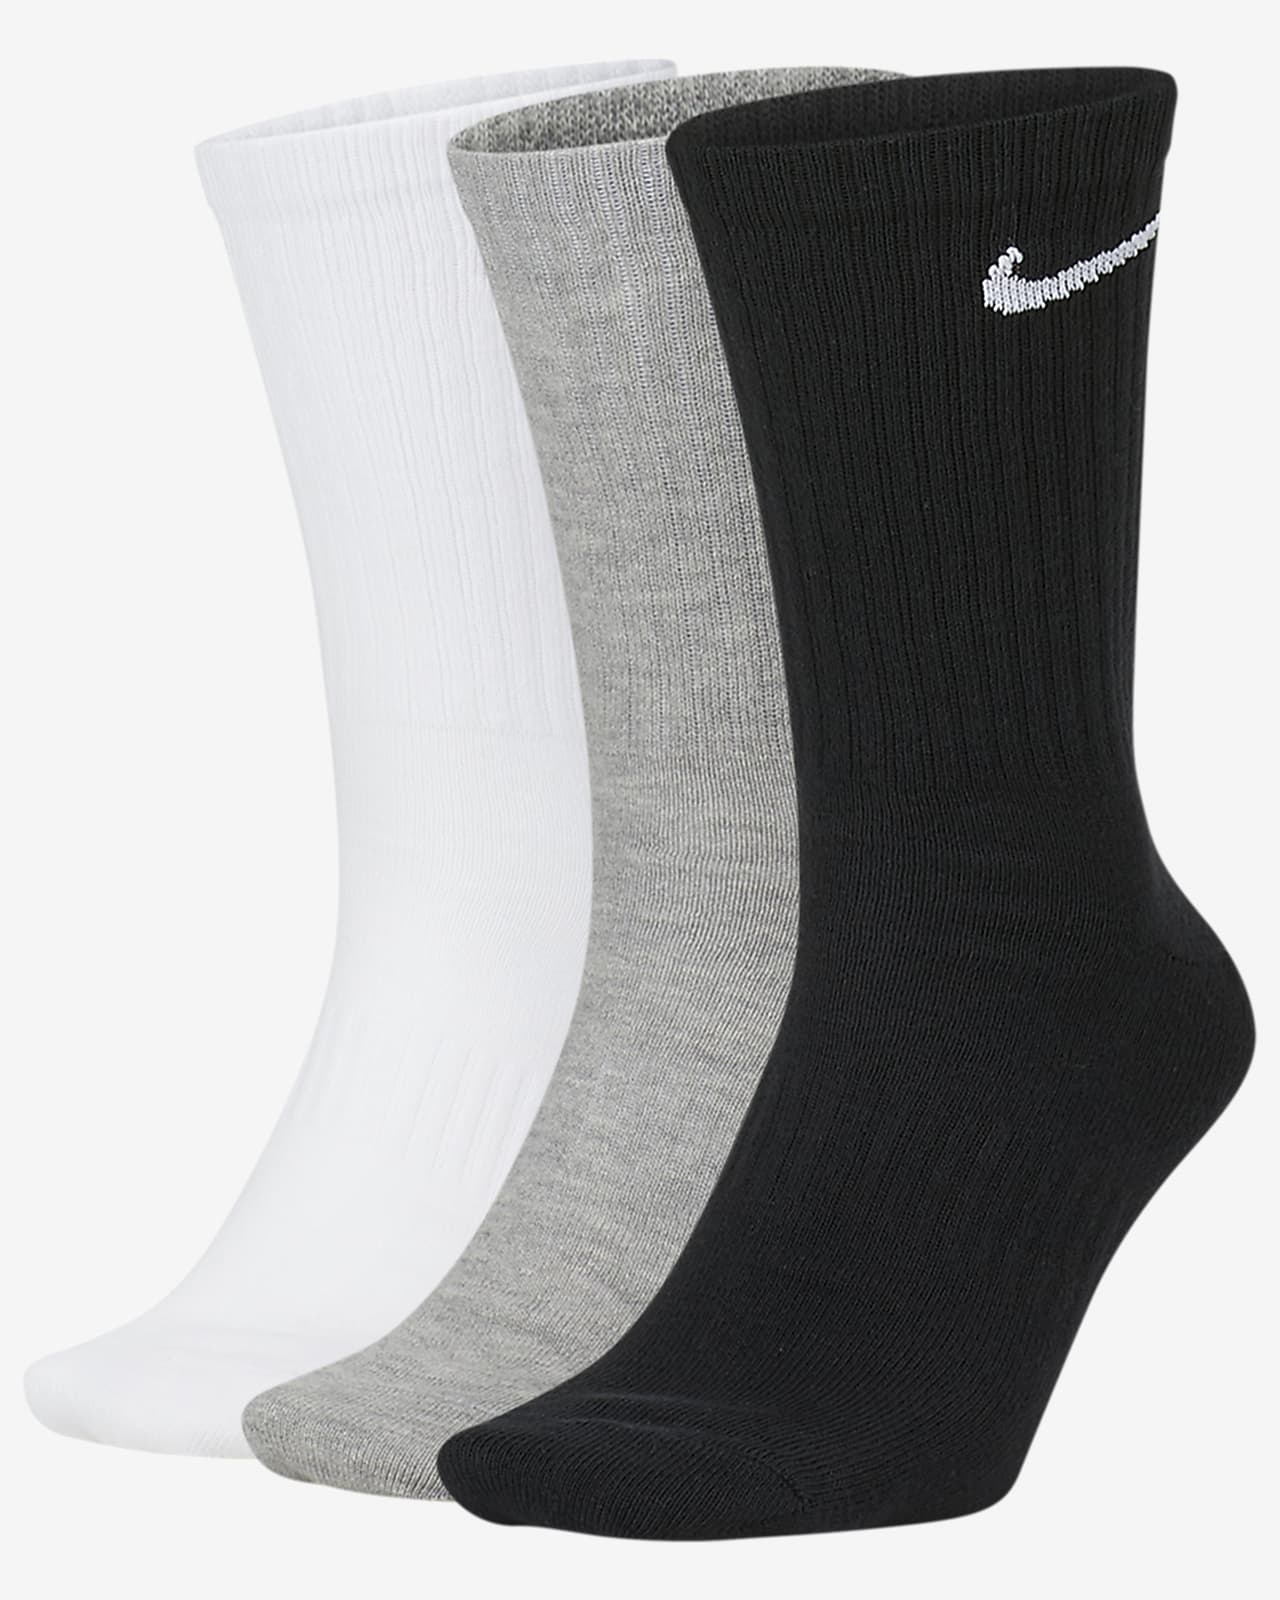 6 Day Workout Crew Socks for Weight Loss